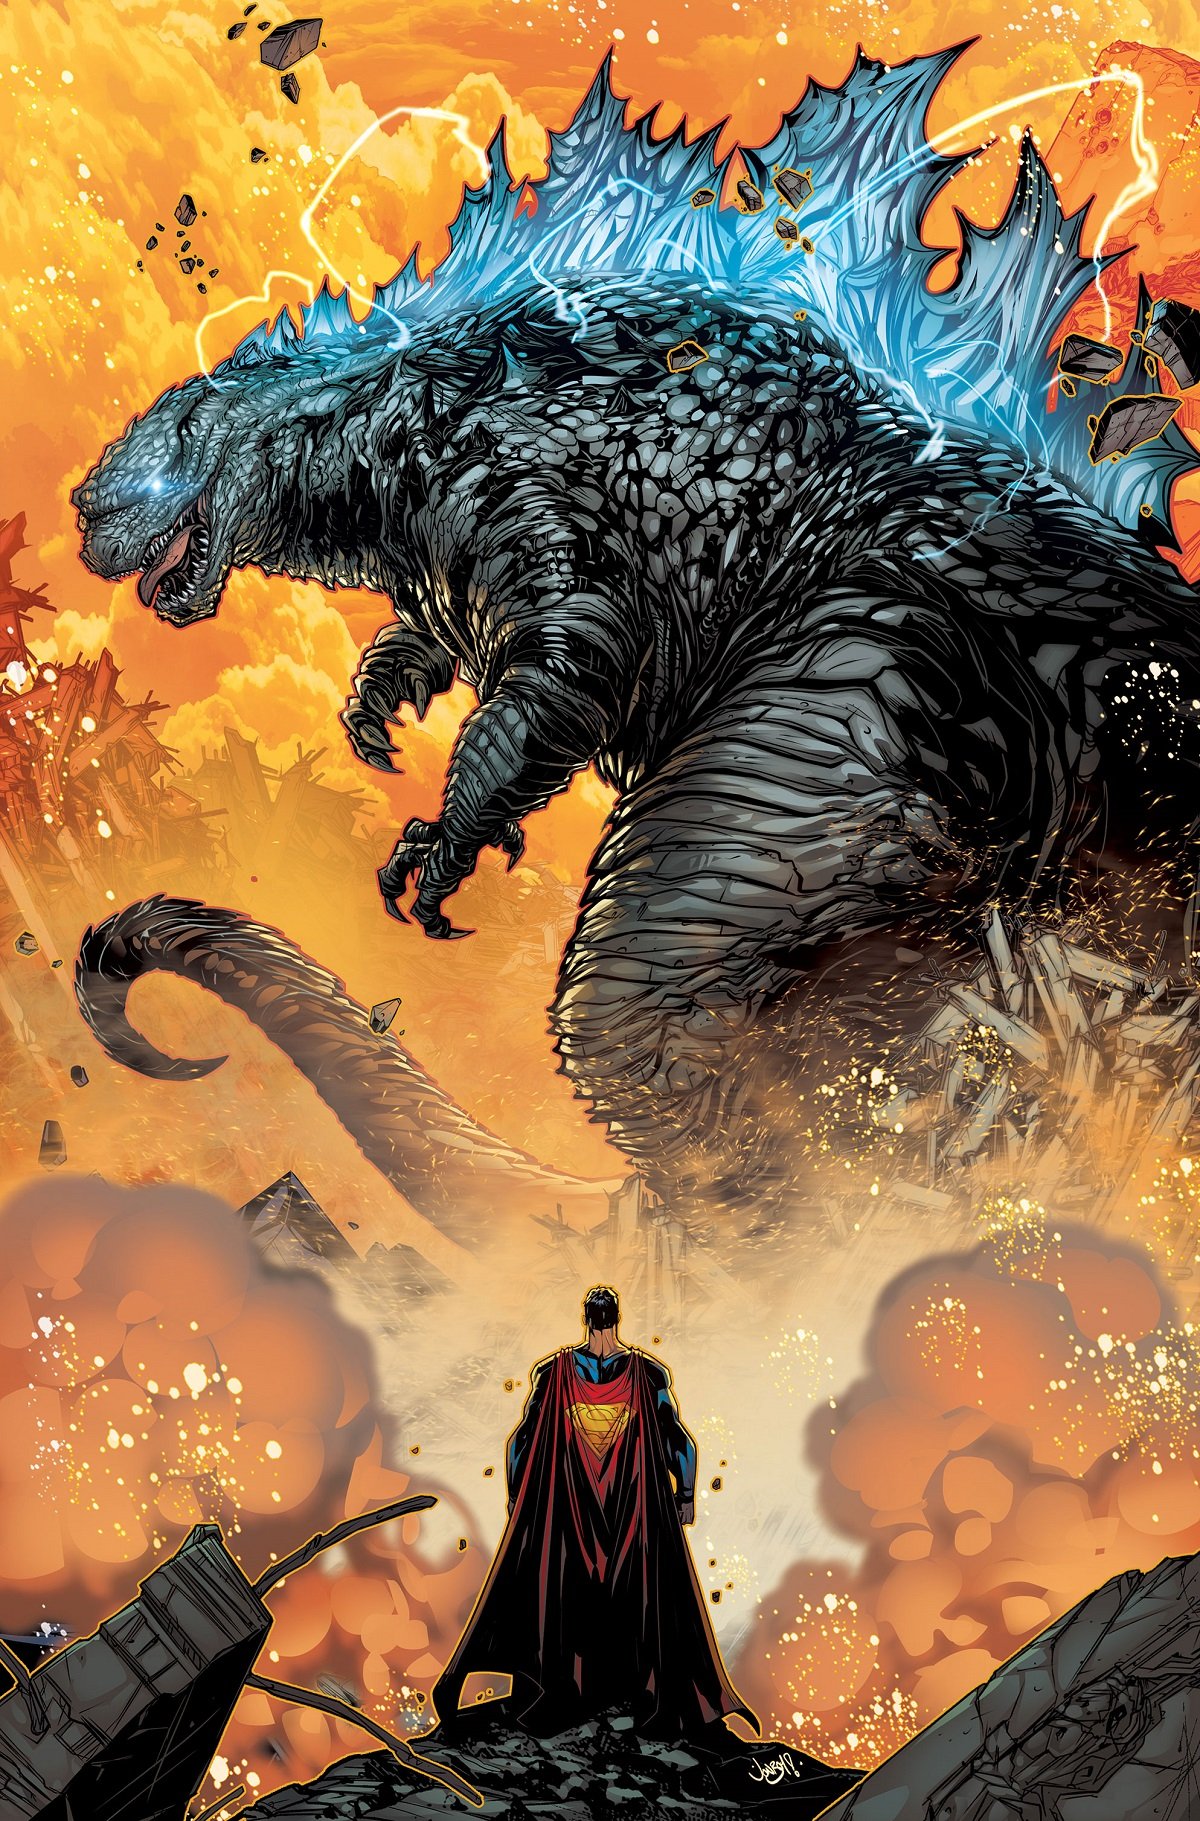 Superman faces the King of the Monsters, in the variant cover for Justice League vs. Godzilla vs. Kong, art by Jonboy Meyers.